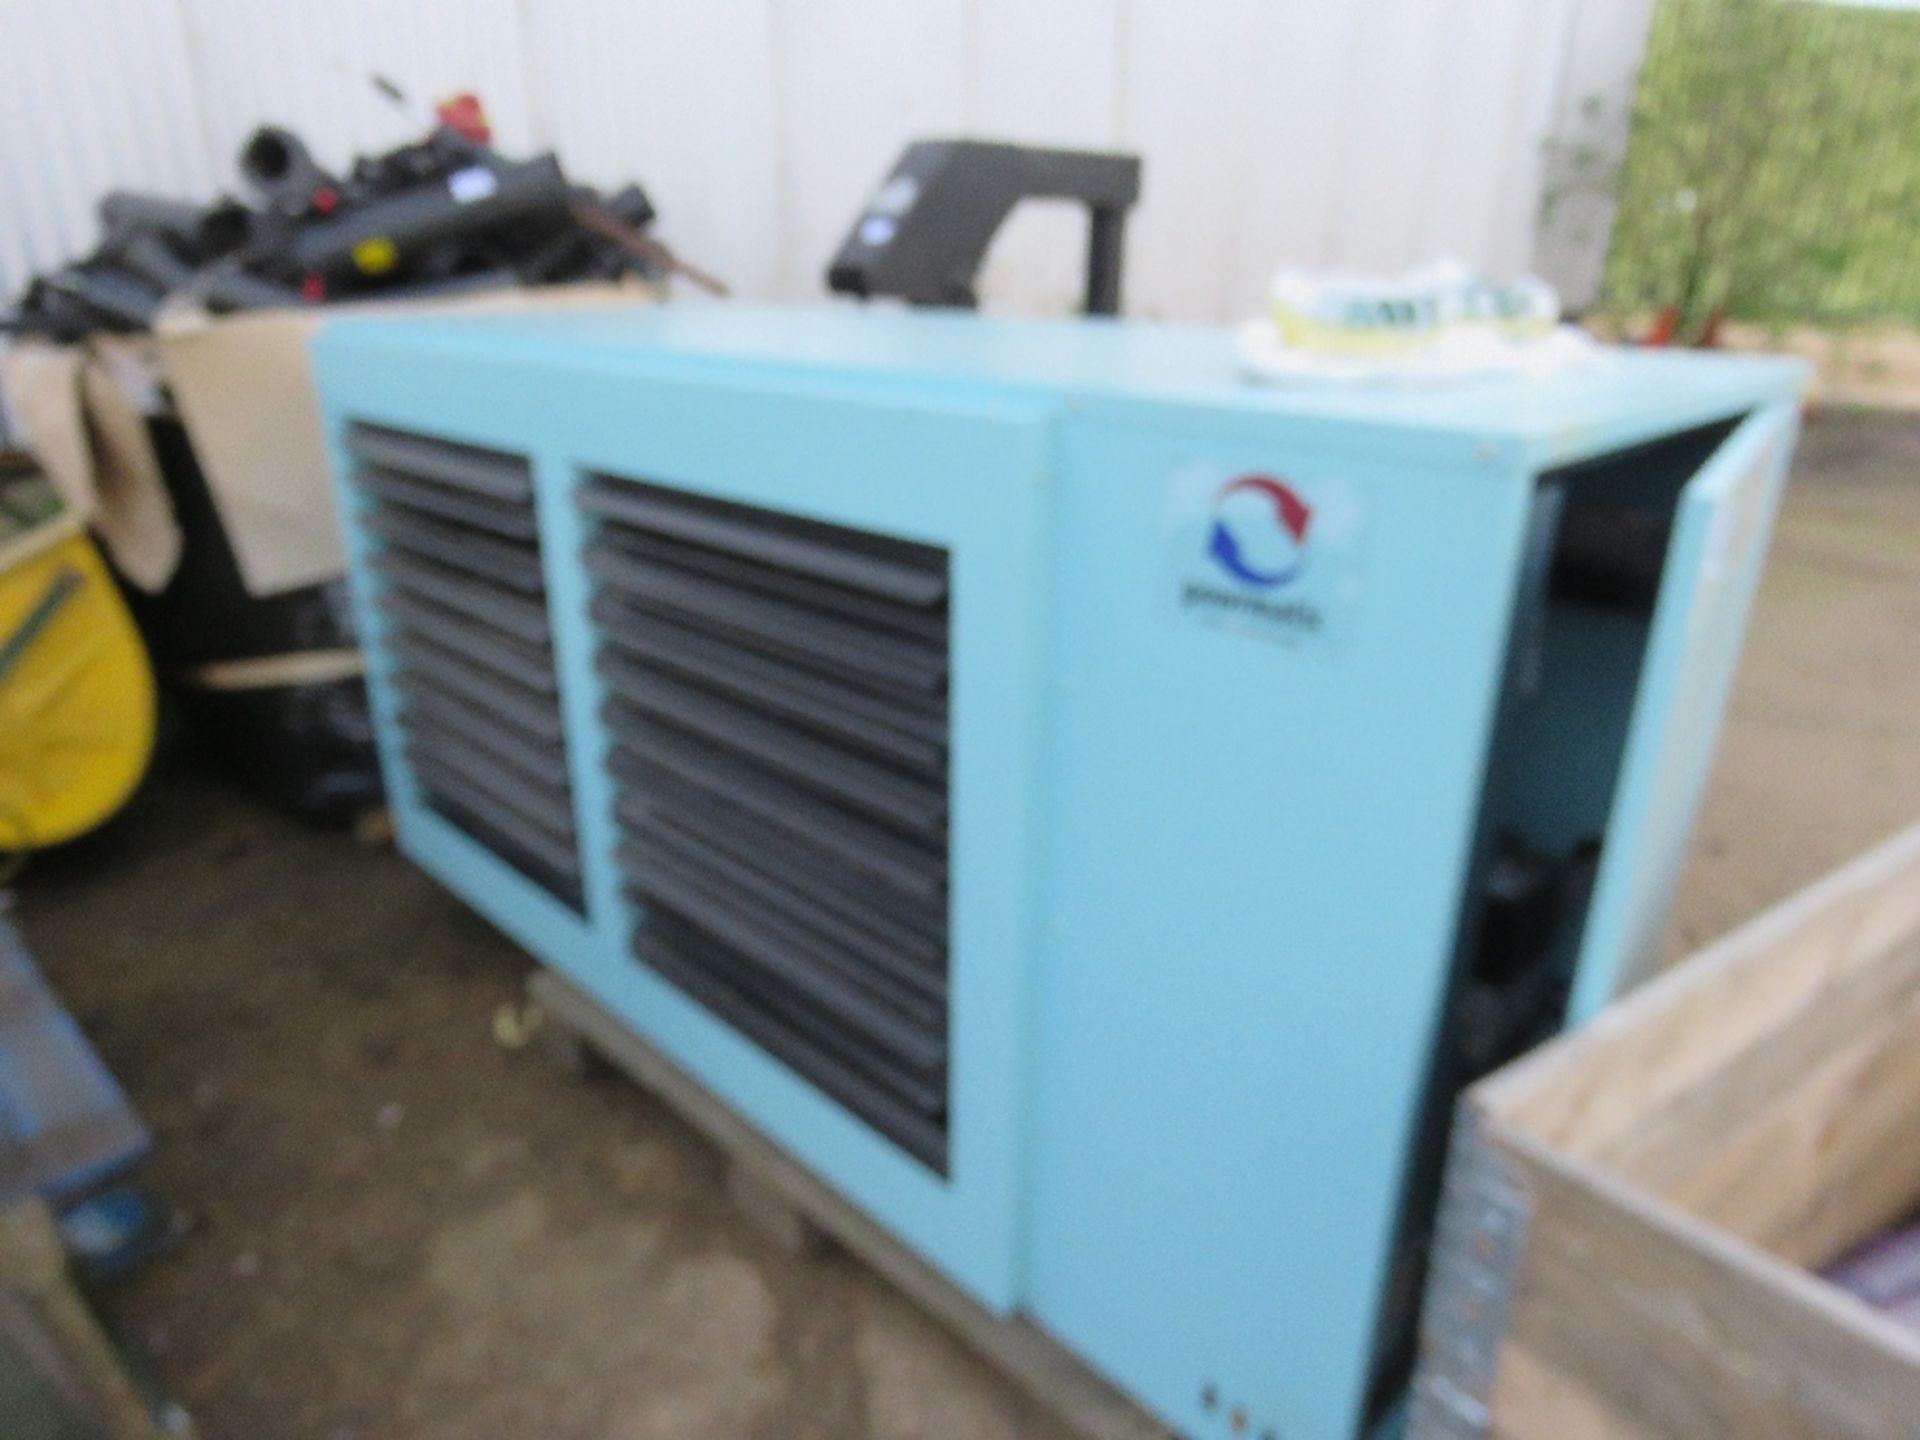 POWRMATIC NVx120 GAS POWERED WAREHOUSE HEATER, LARGE OUTPUT, YEAR 2016 BUILD.